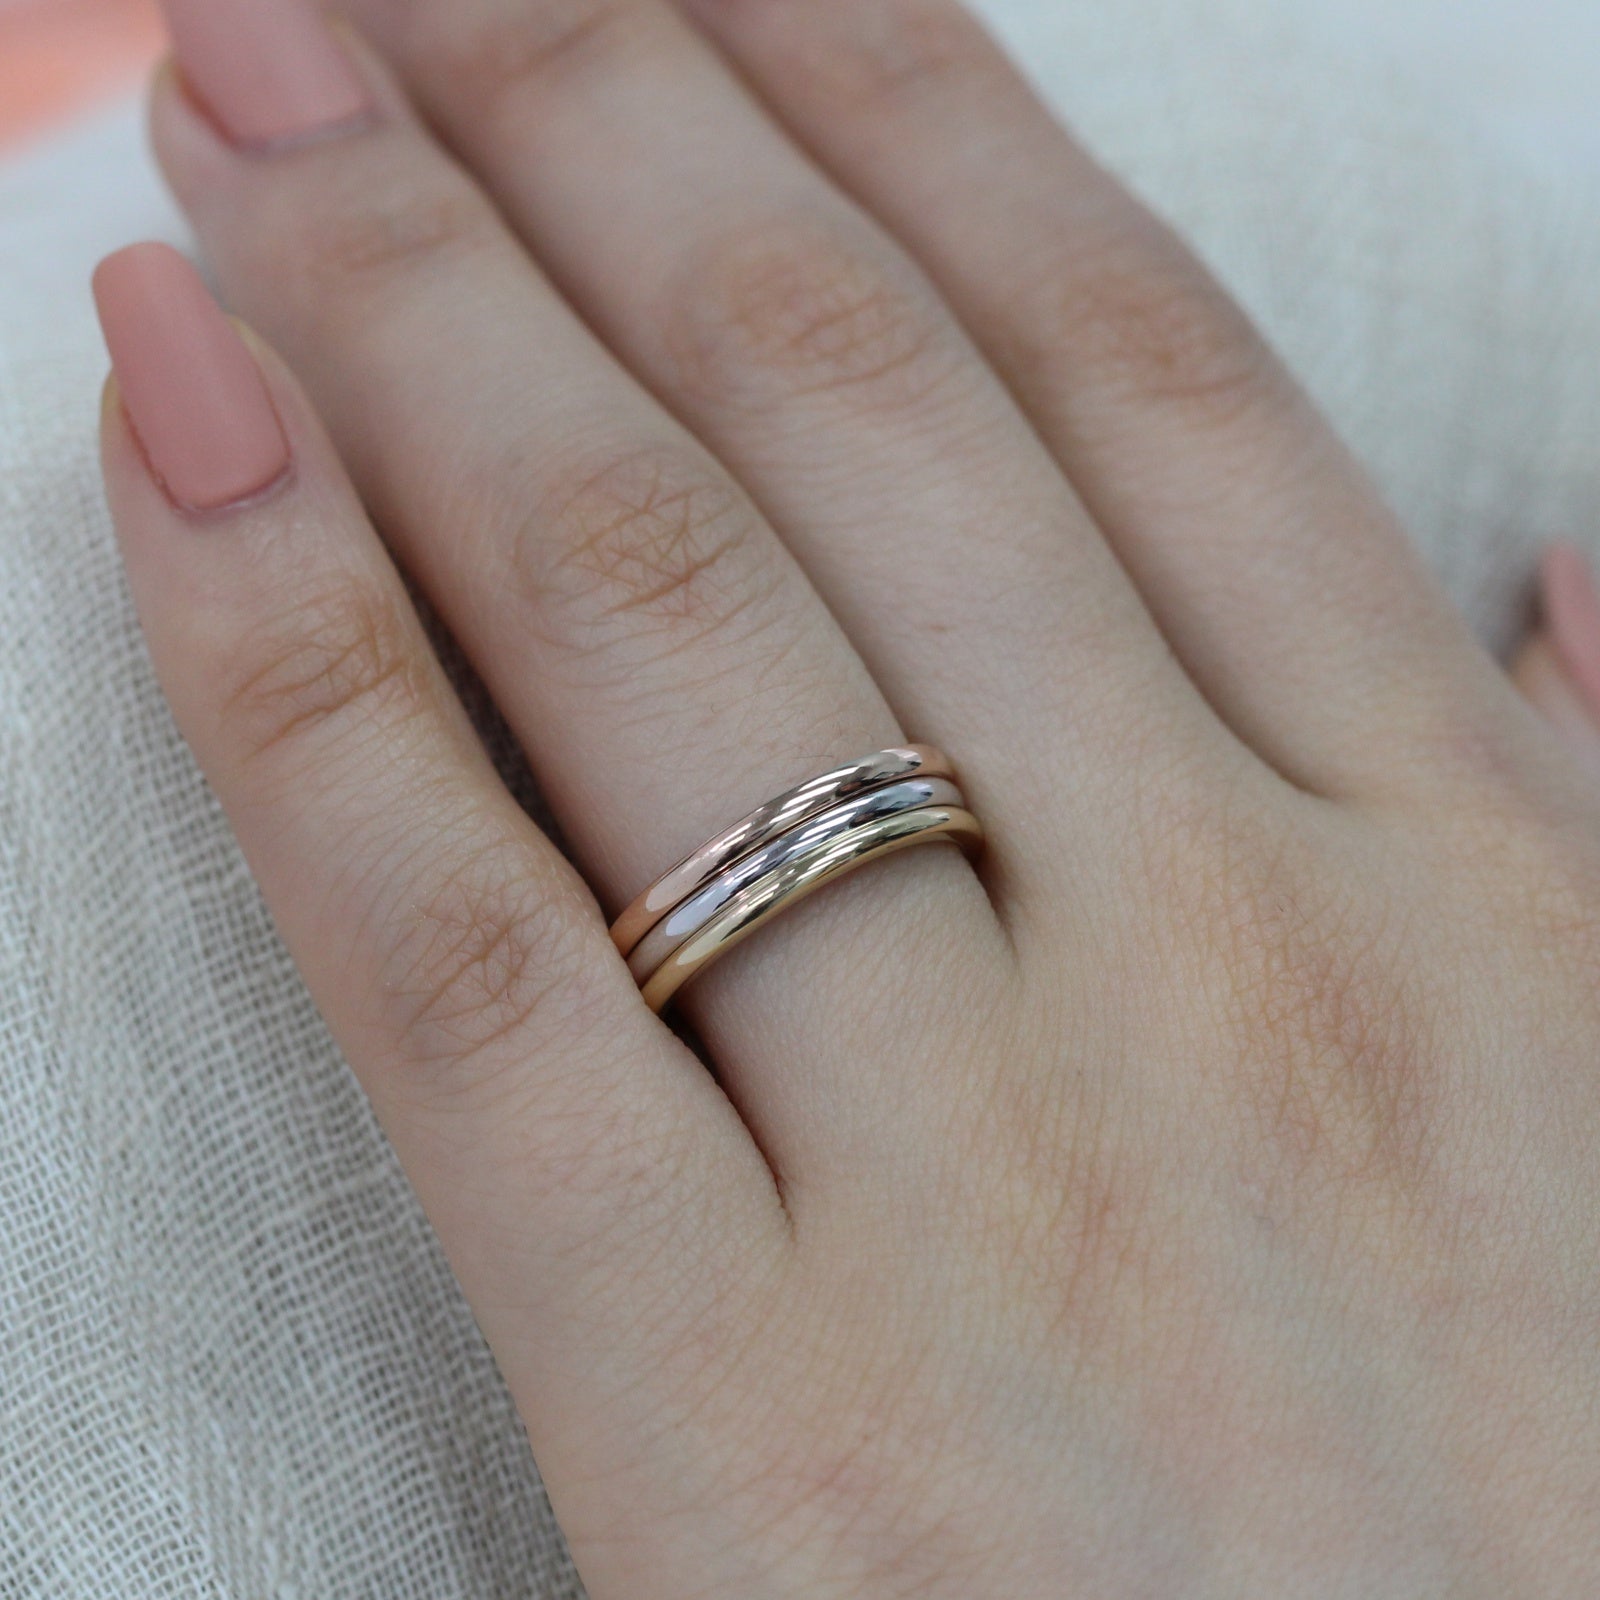 Plain gold wedding band solid 14k rose gold ring by la more design jewelry